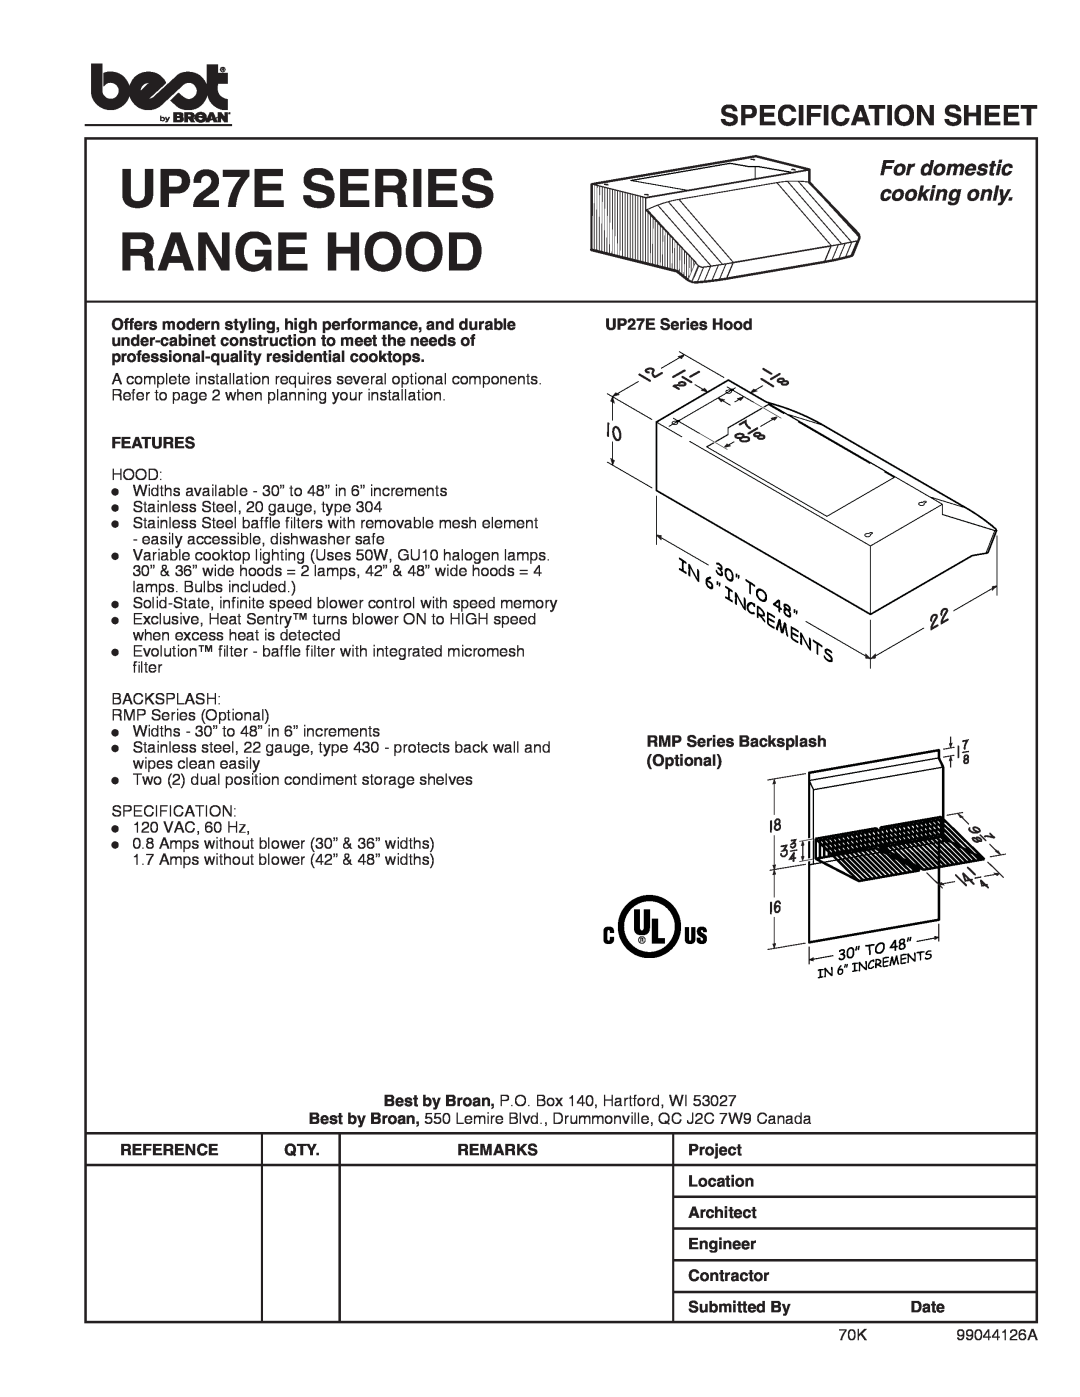 Best manual Read And Save These Instructions, UP27I and UP27E SERIES, Installation Instructions, V07855 rev. A, HB0061 